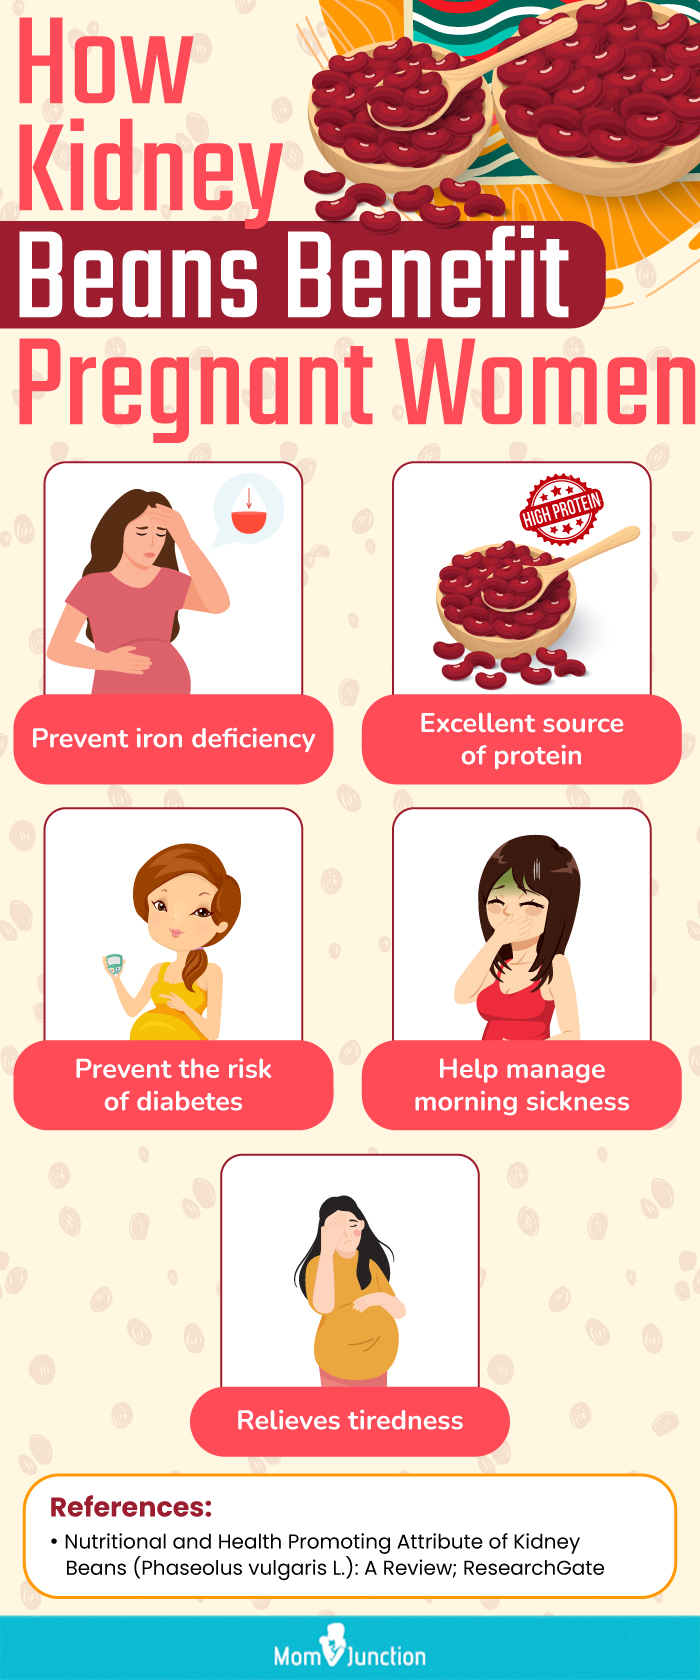 how kidney beans benefit pregnant women (infographic)